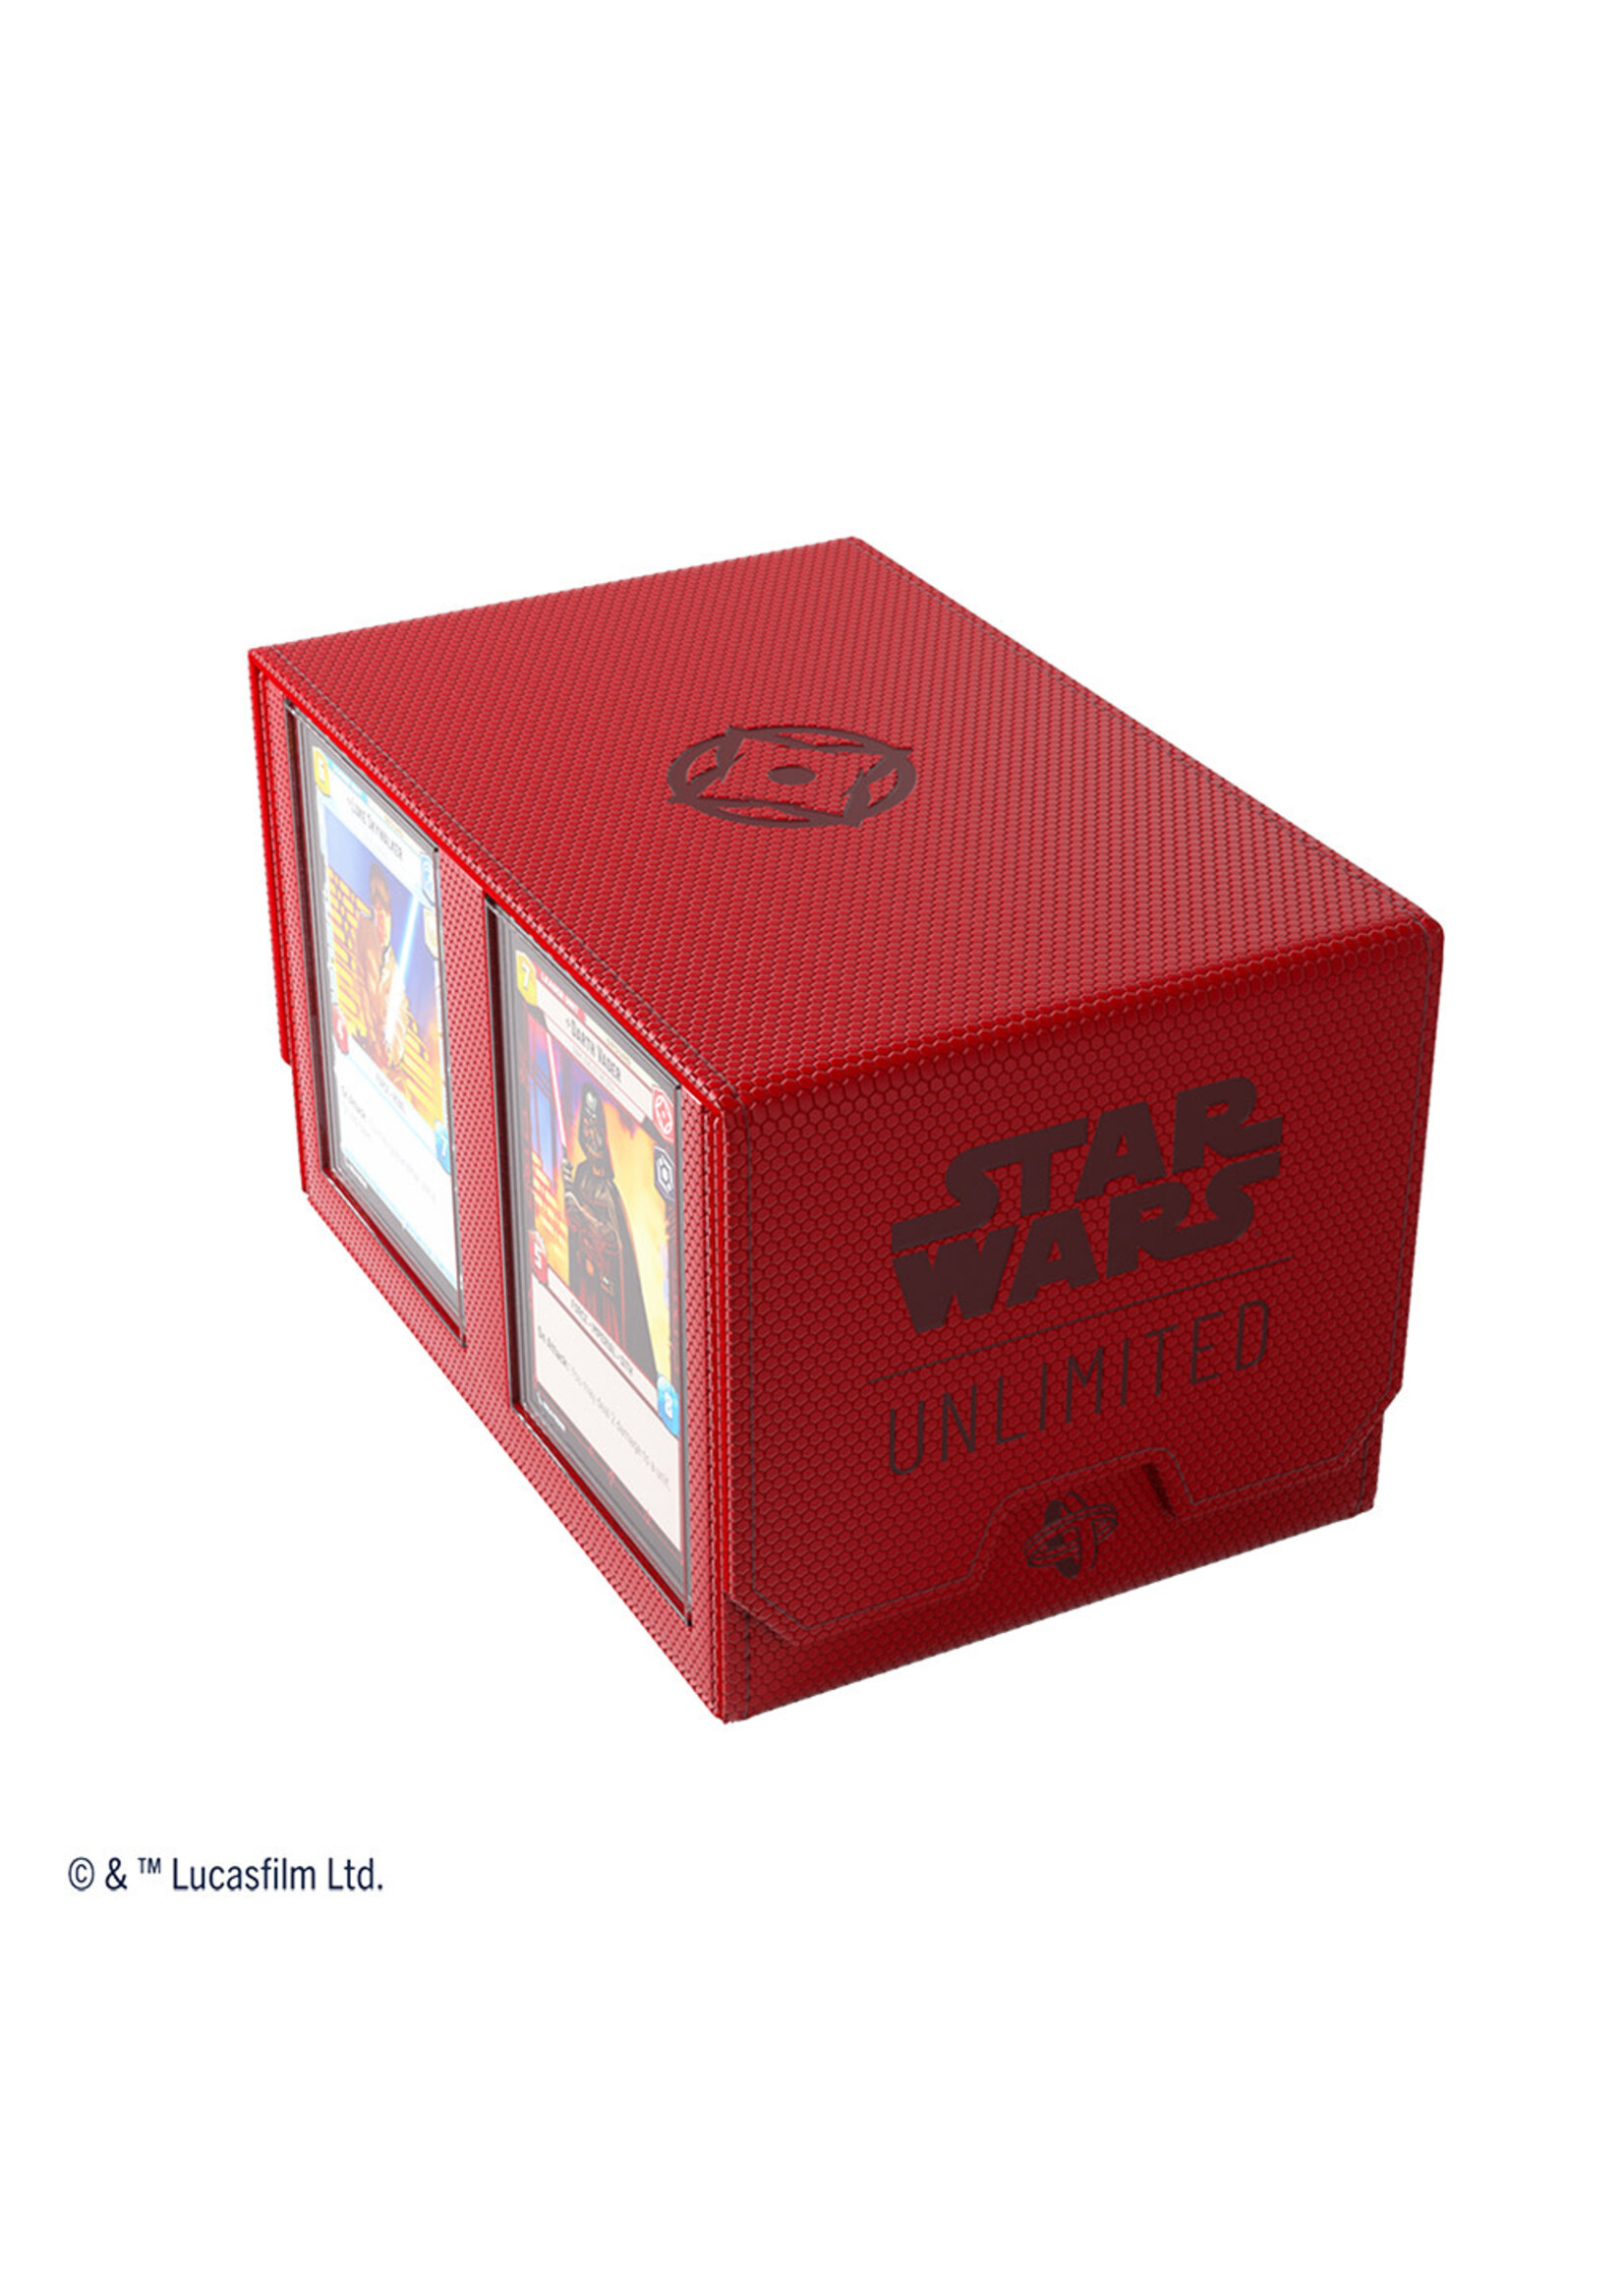 Gamegenic Star Wars: Unlimited Double Deck Pod - Red